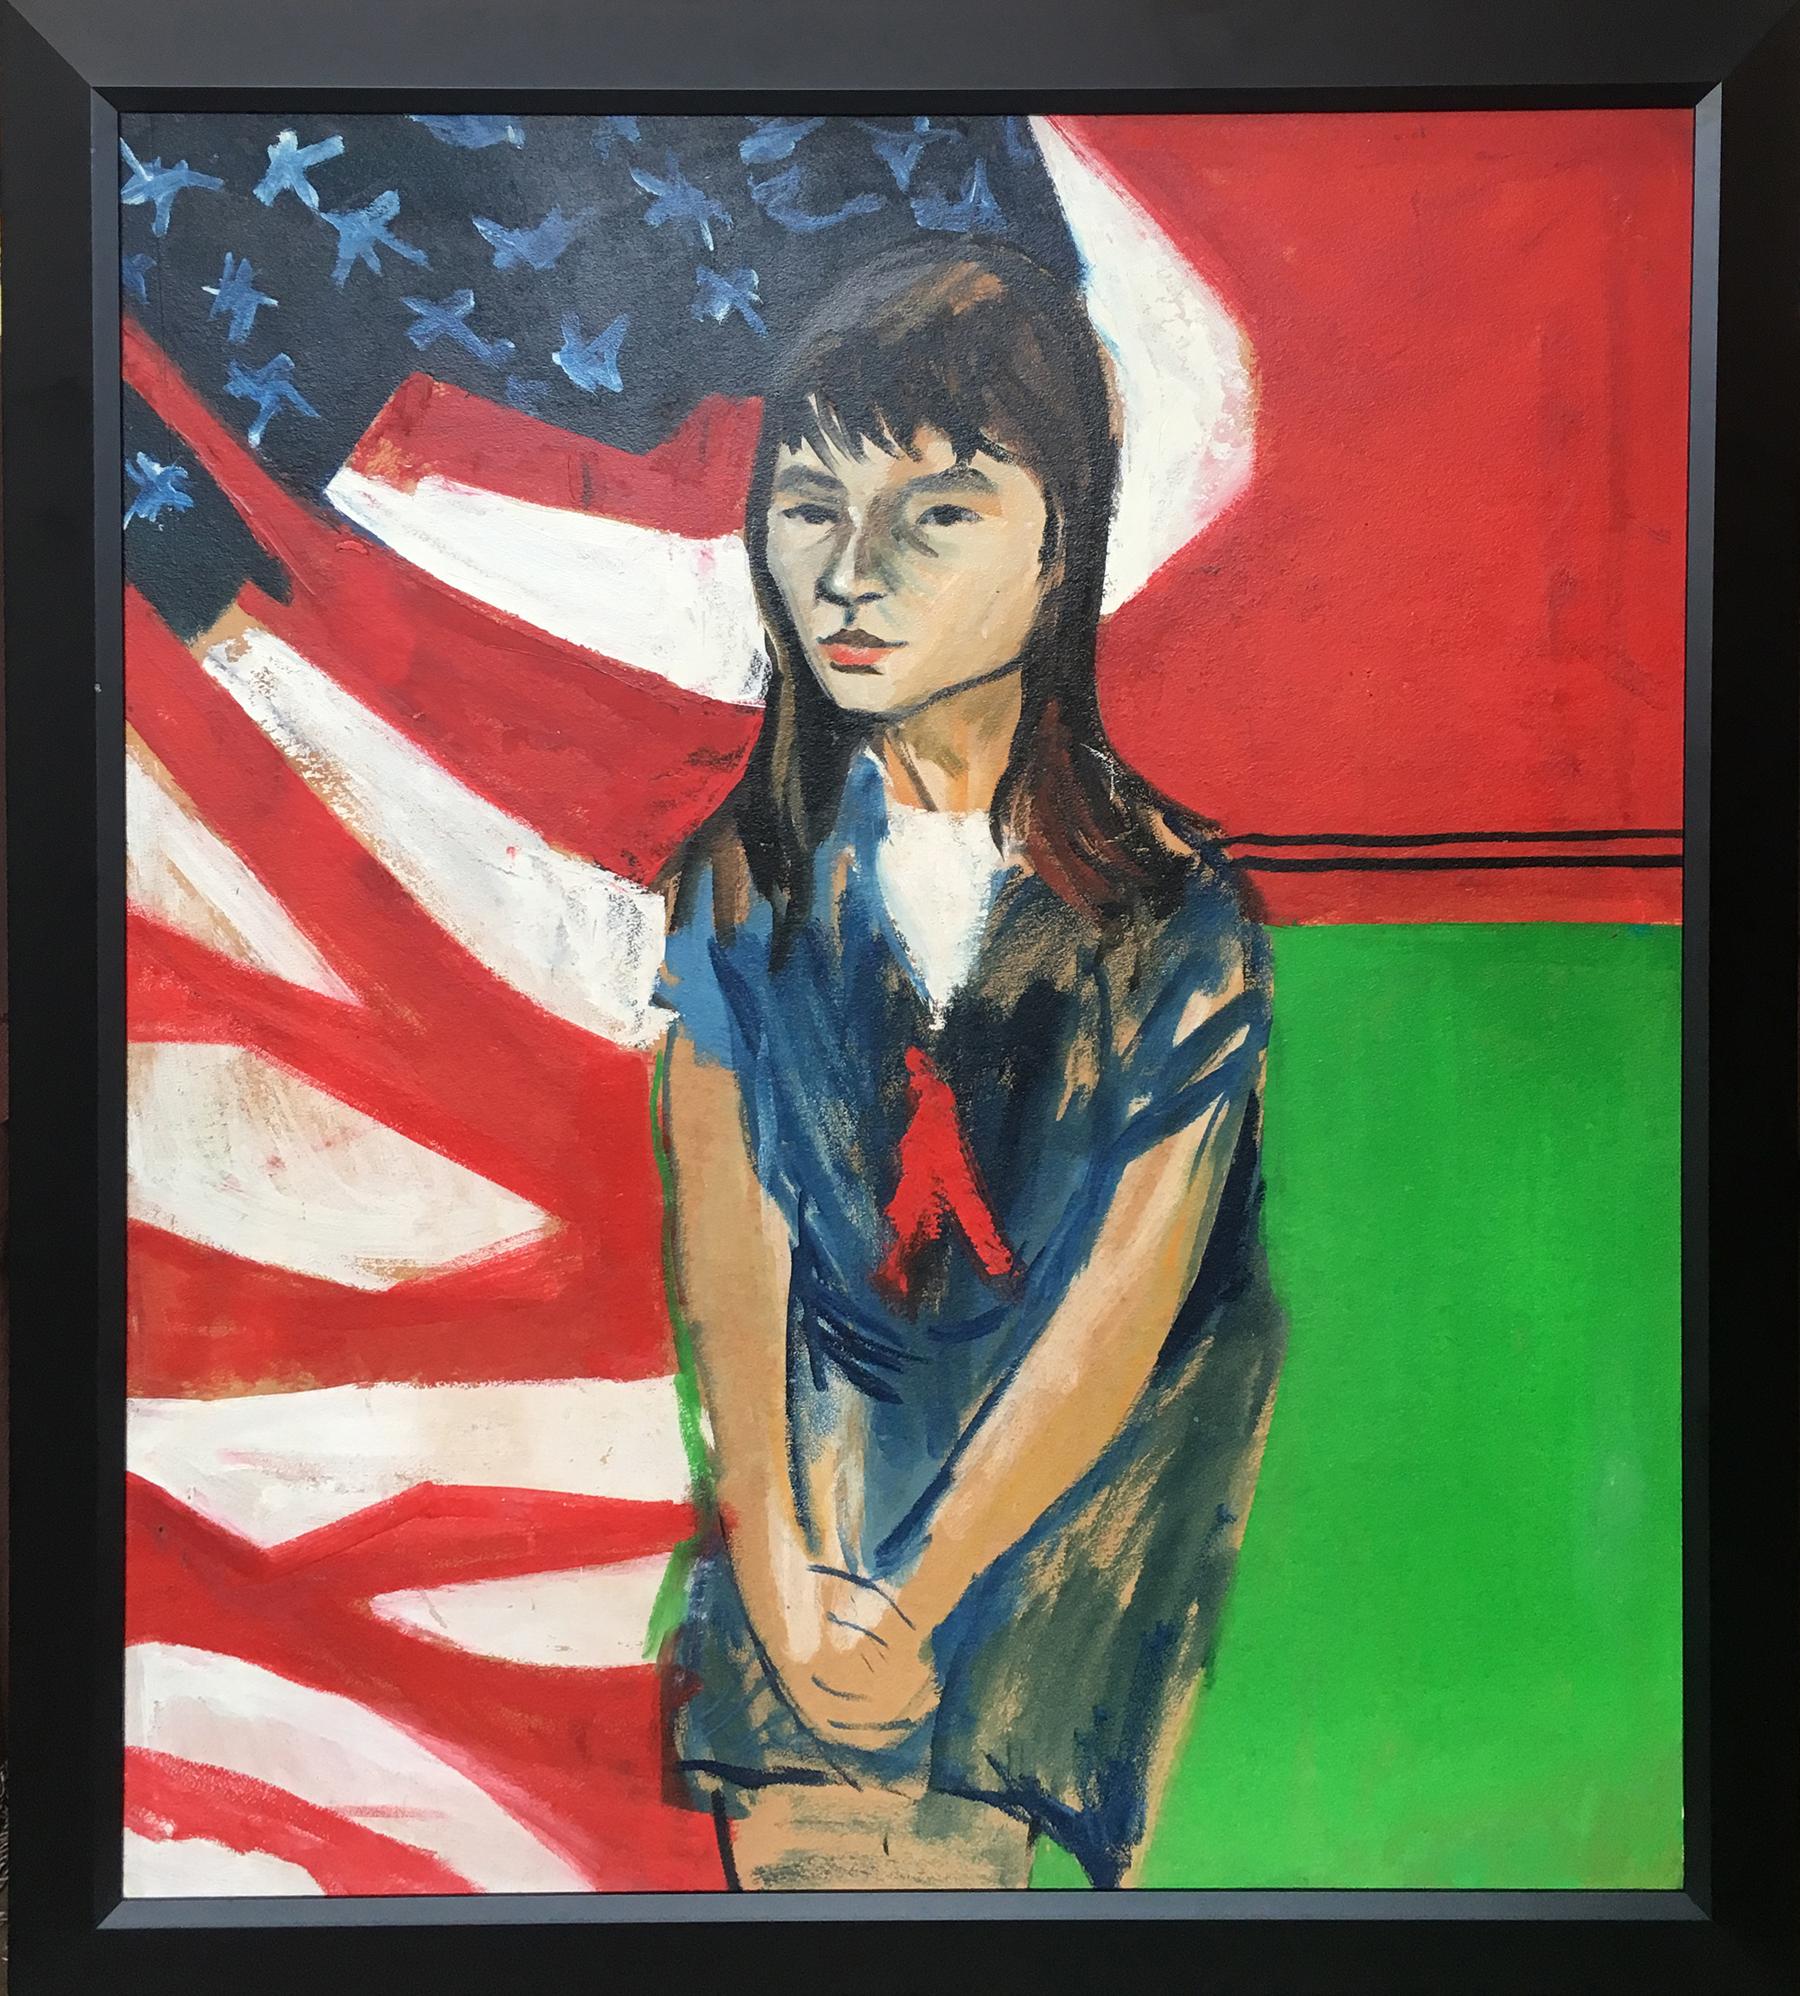 Bernard Harmon Portrait Painting - Stars and Stripes, Expressionist Portrait with American Flag